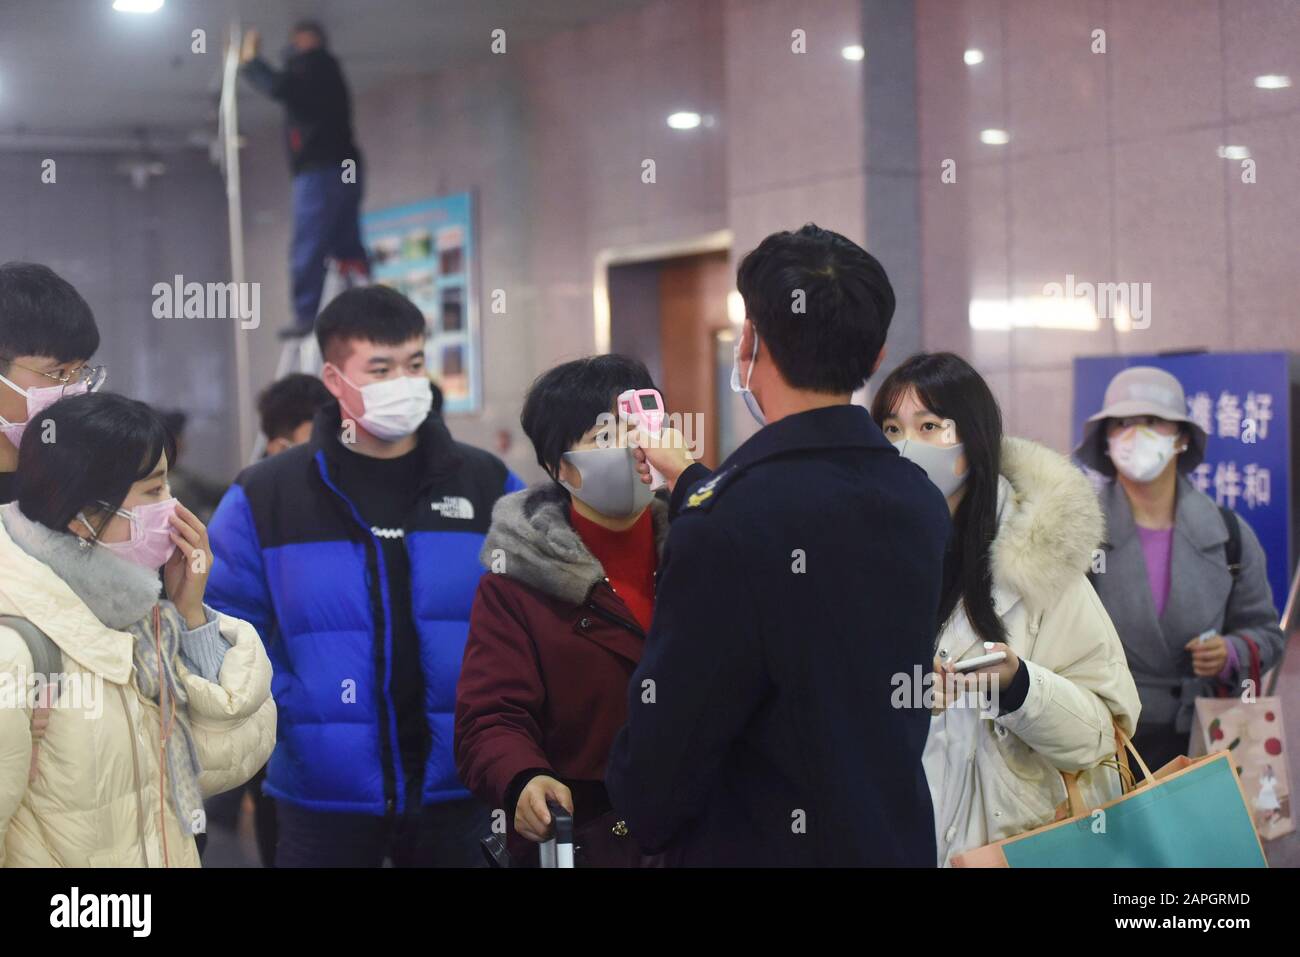 Chinese workers check body temperatures of the passengers wearing face masks for the prevention of the new coronavirus at Hangzhou Railway Station in Stock Photo